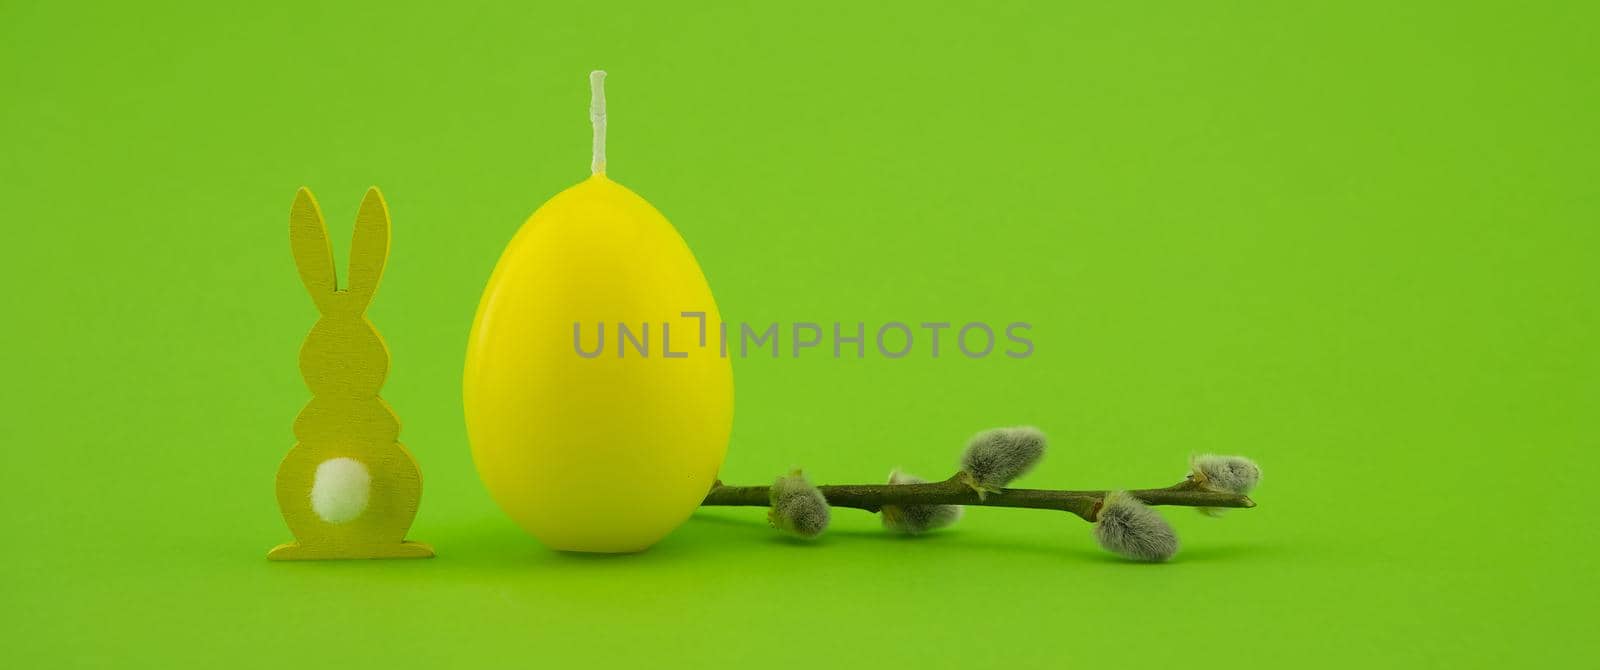 Minimalistic style Easter banner with yellow egg by NetPix